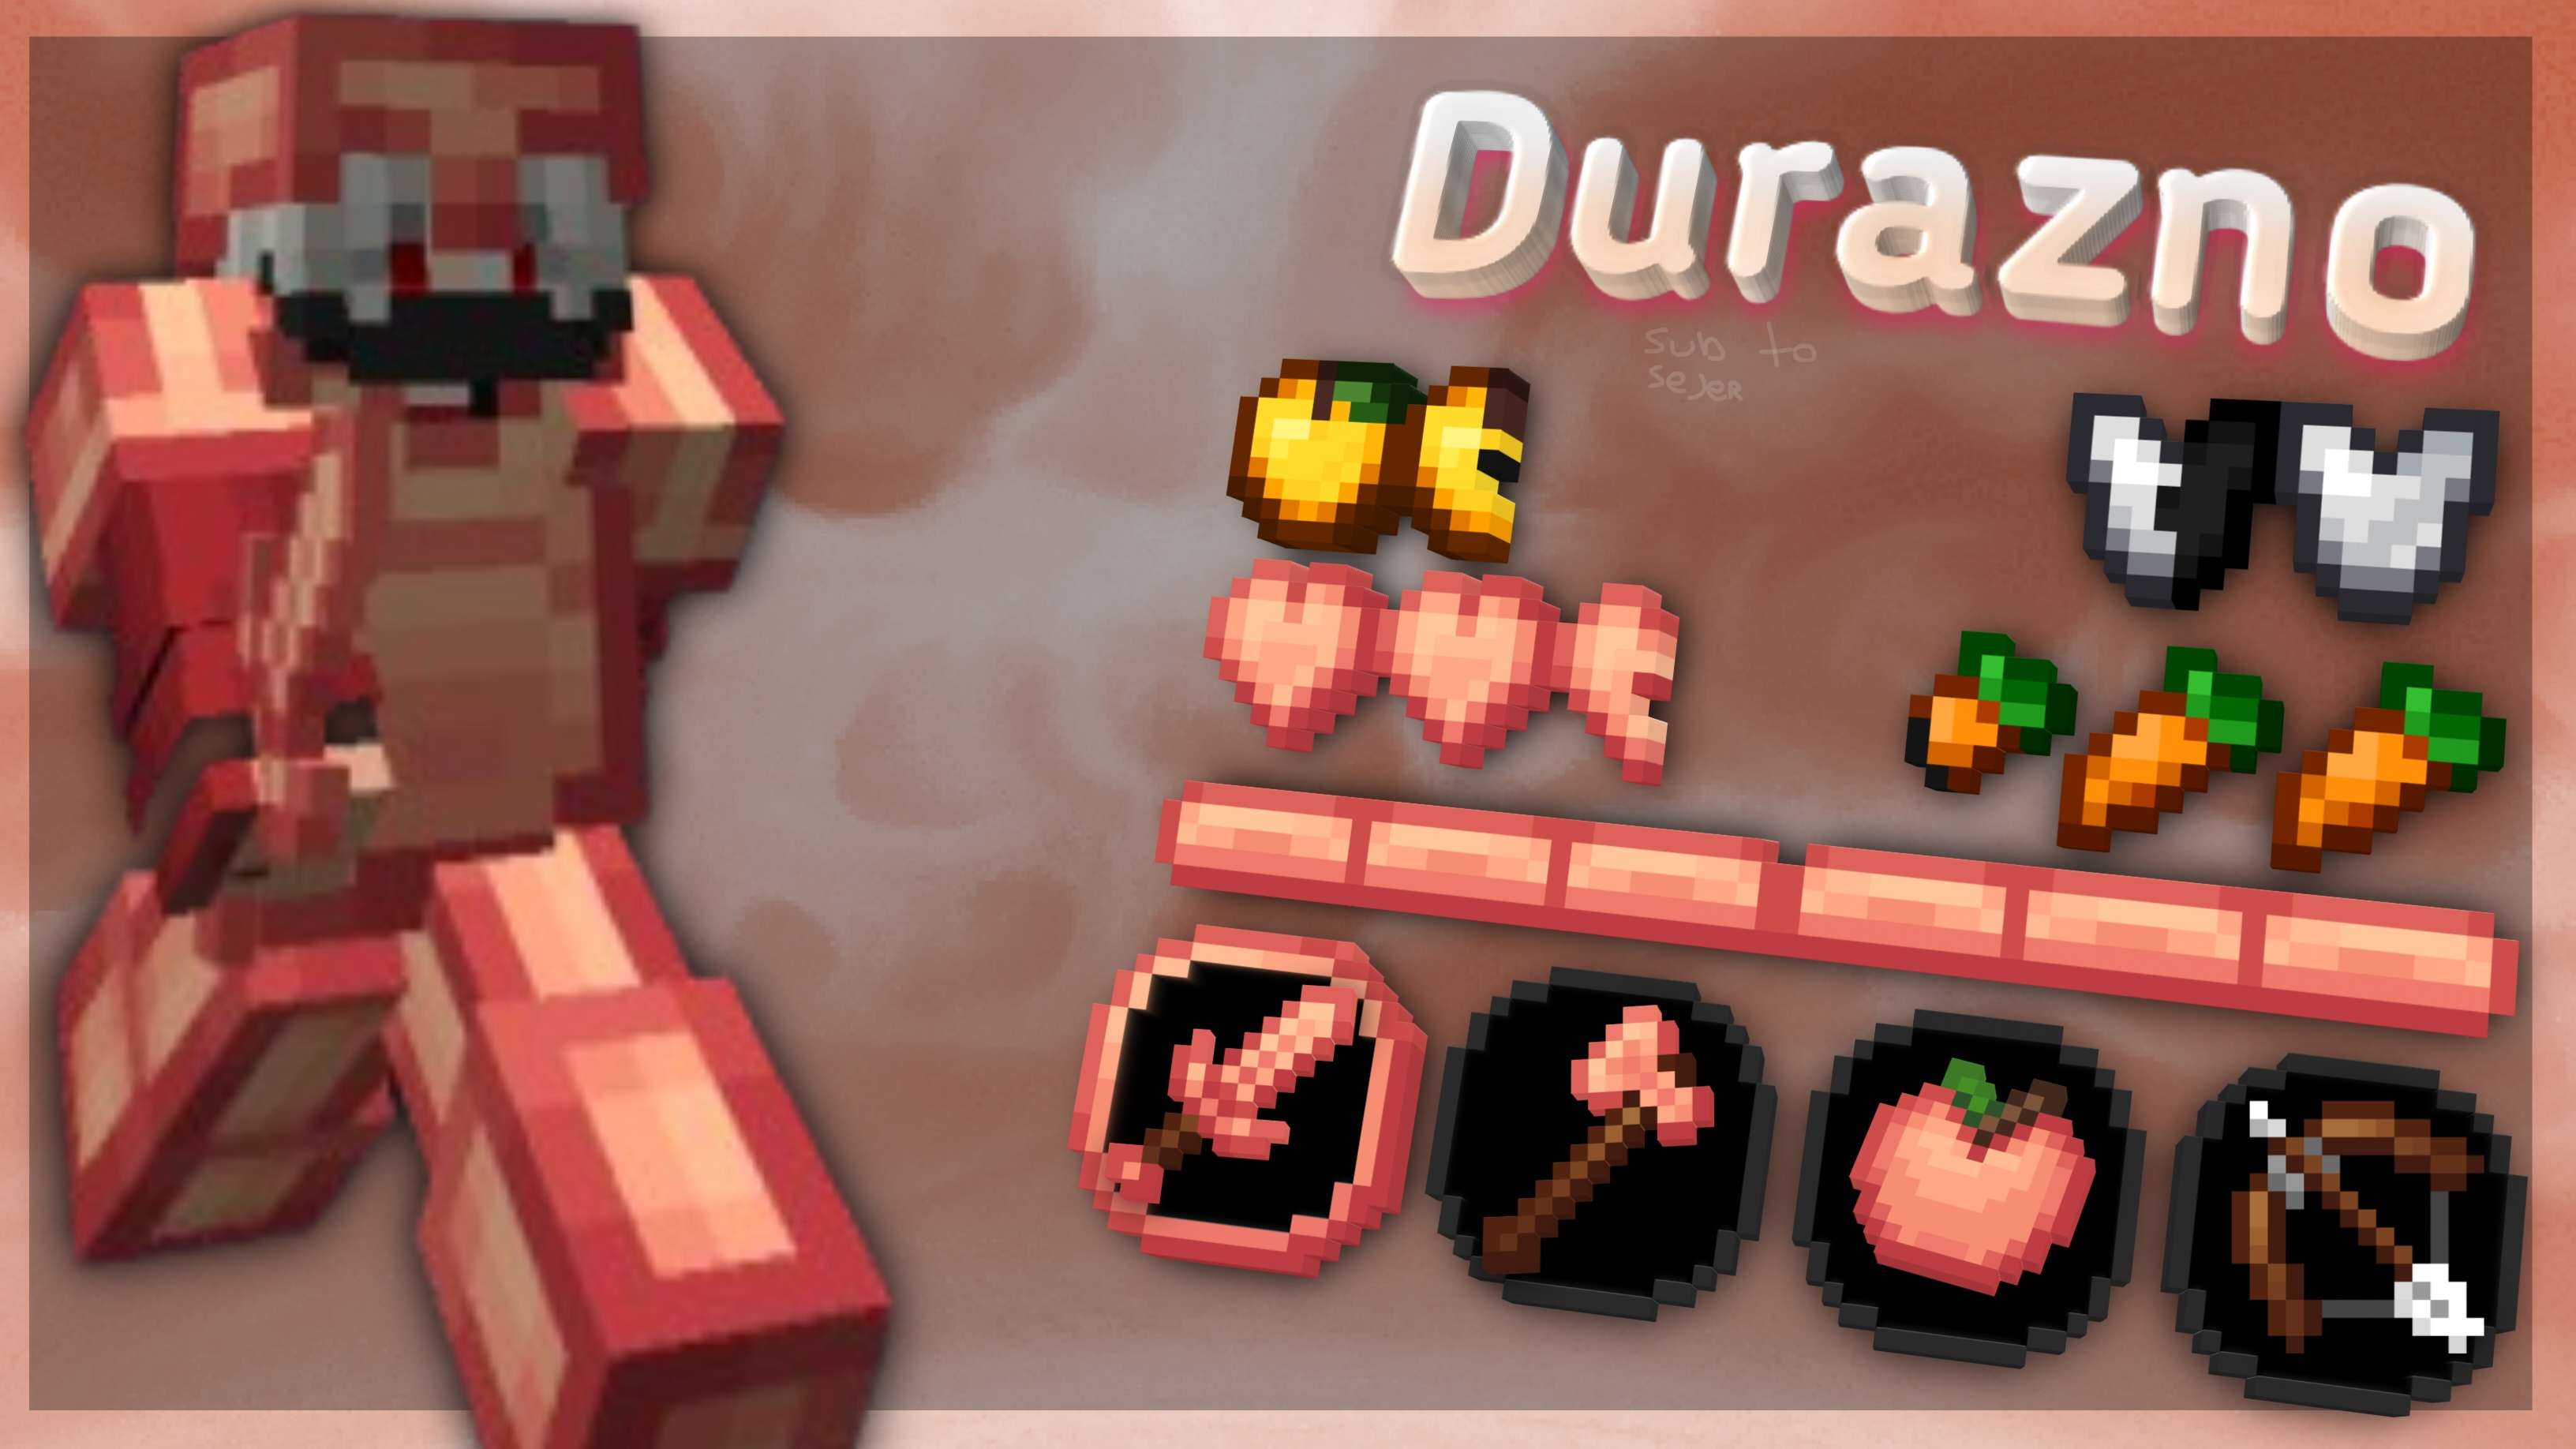 Gallery Banner for Duzarno on PvPRP